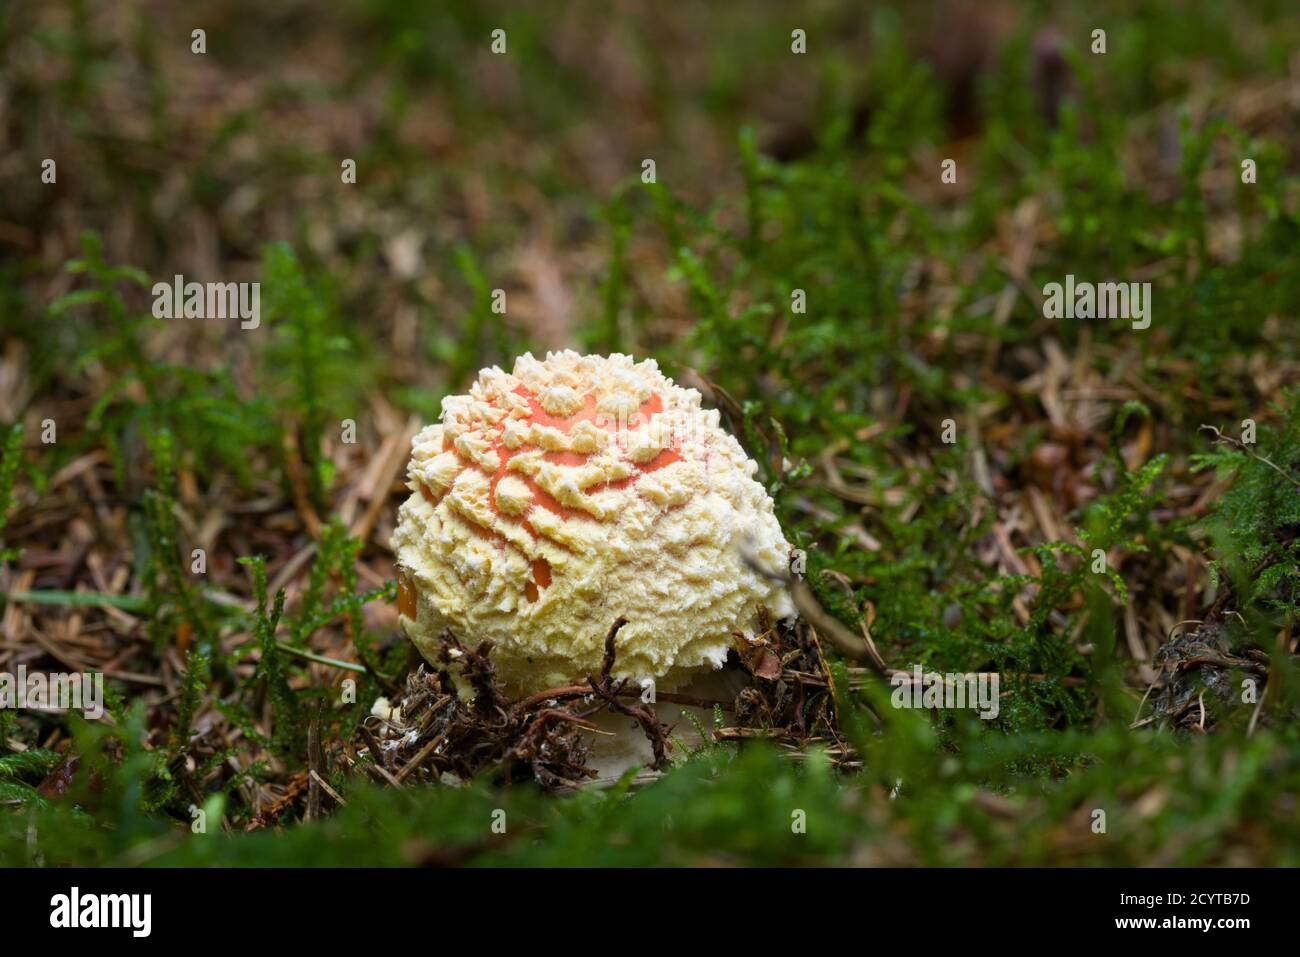 A Fly Agaric or Fly Amanita (Amanita muscaria) mushroom emerging from the moss and leaf litter on pine forest floor in the Mendip Hills, Somerset, England. Stock Photo